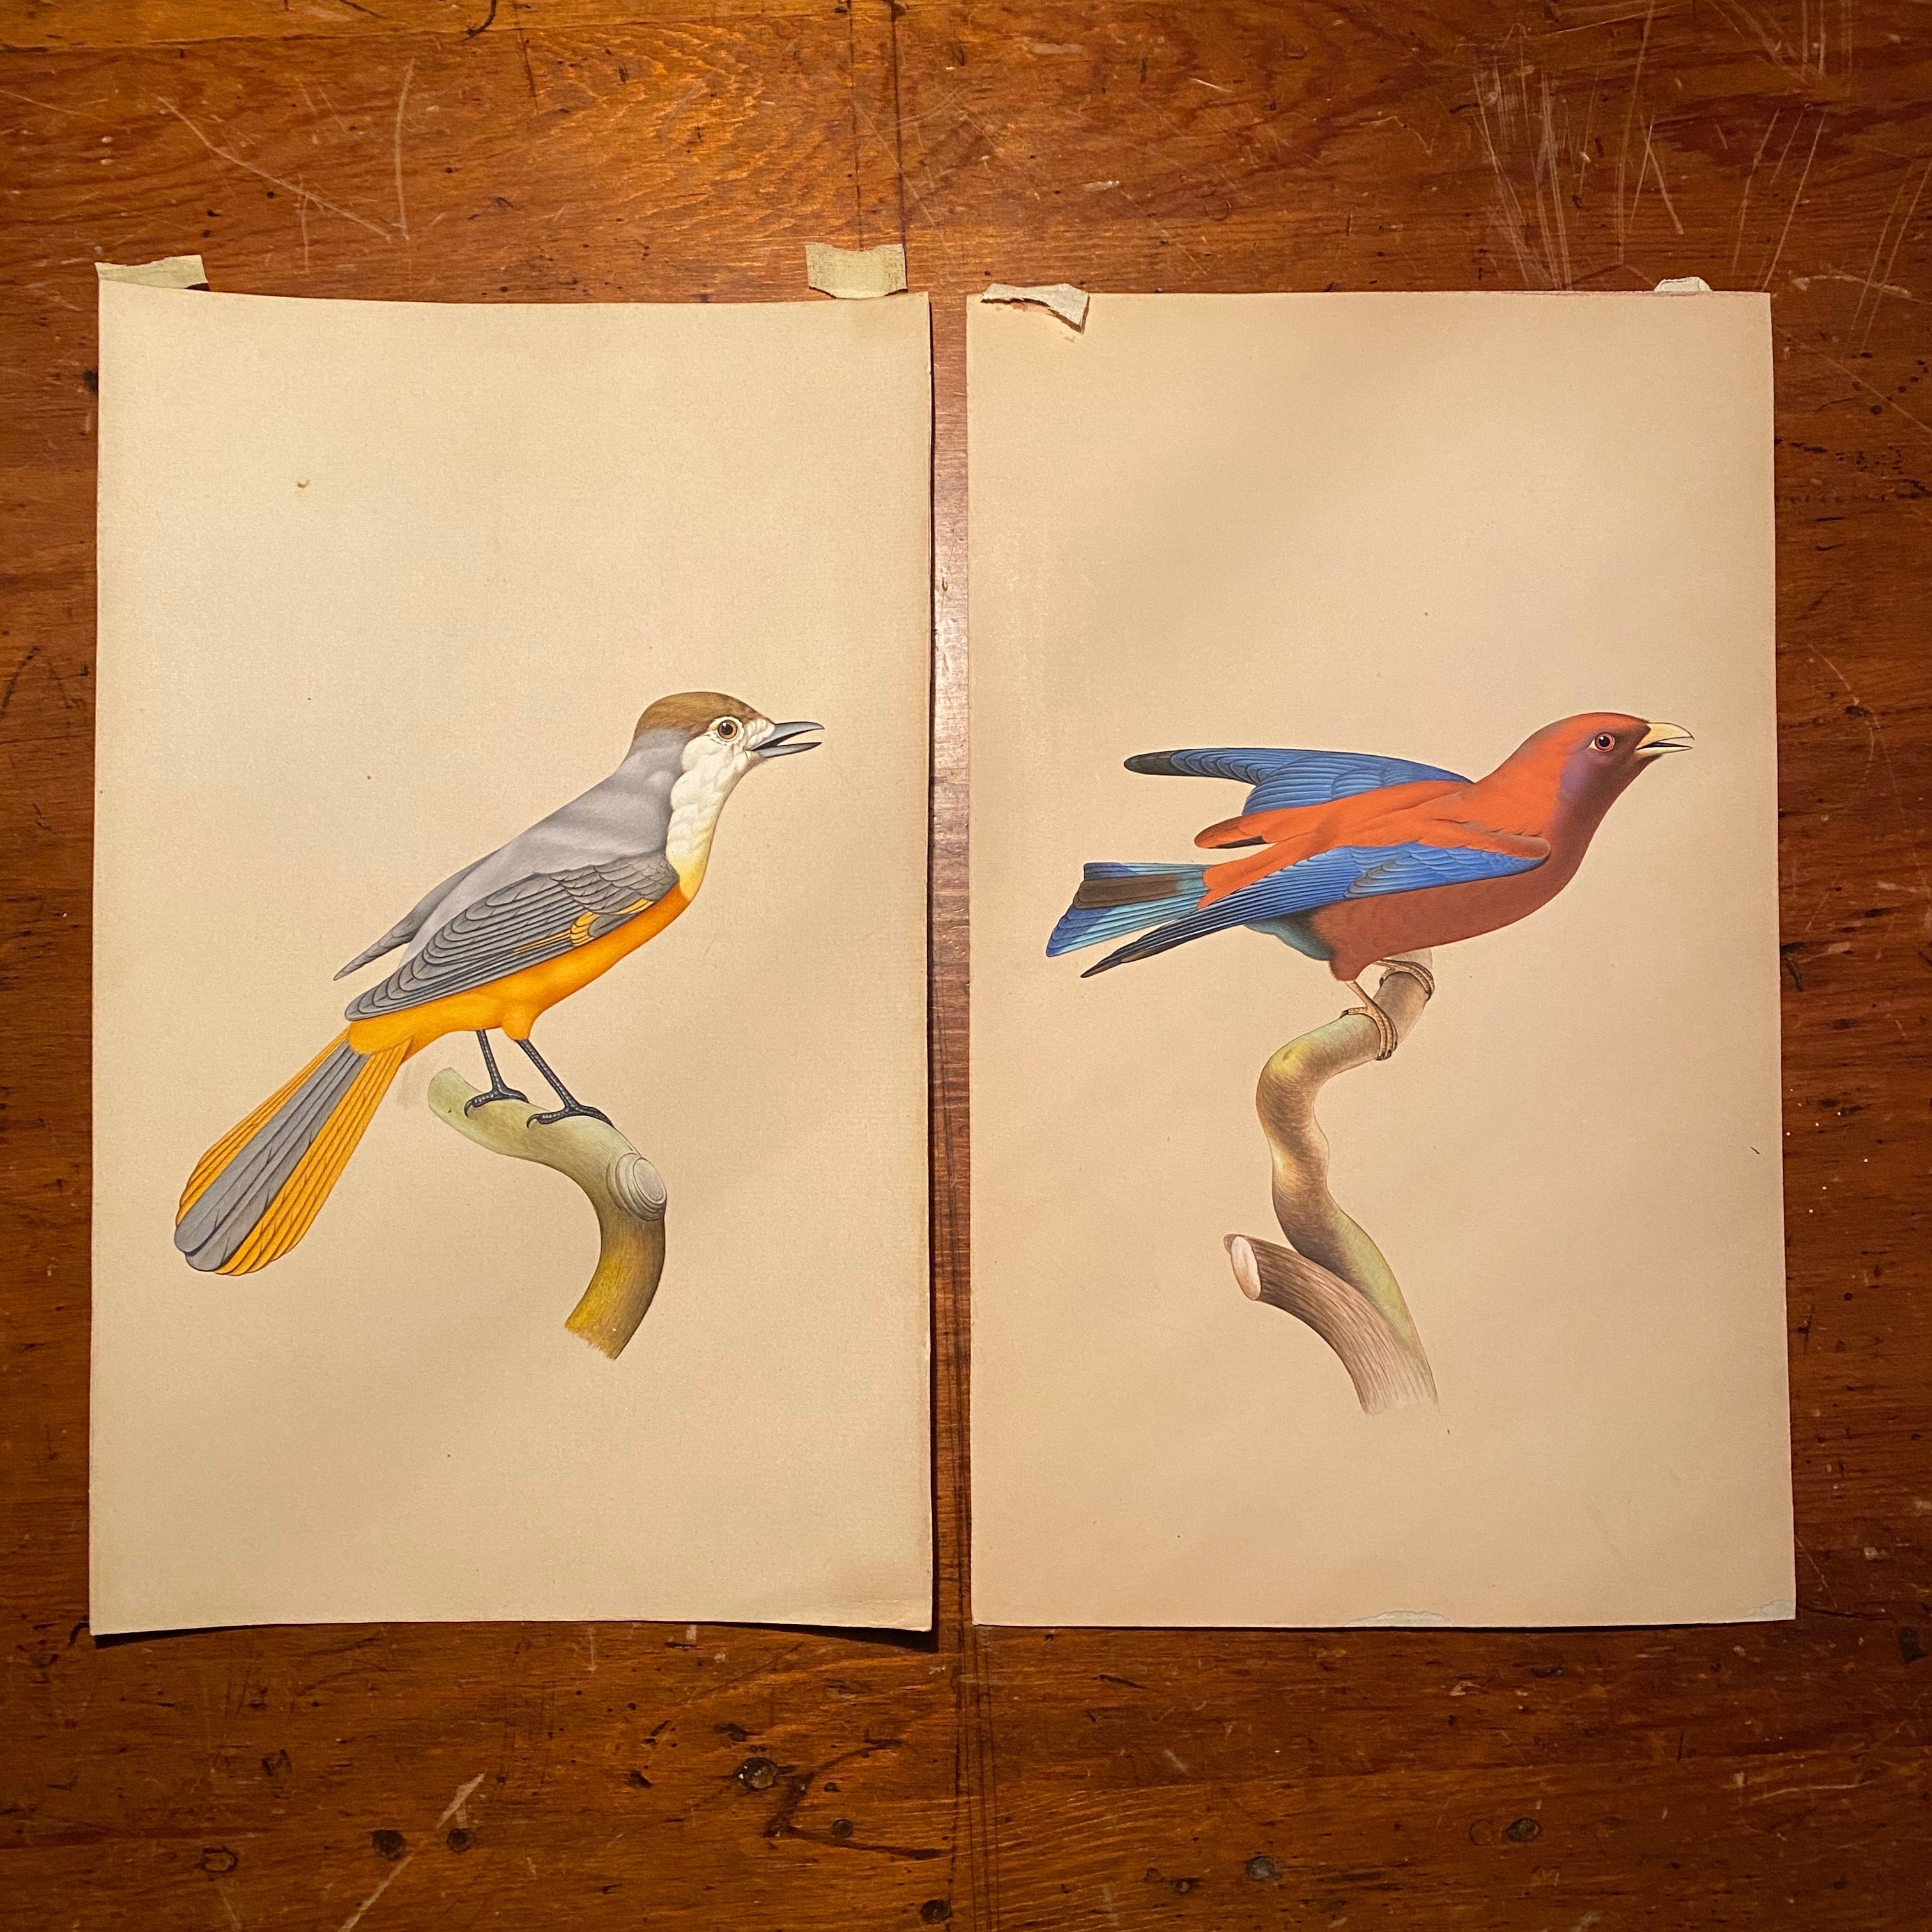 Bird Watercolor Paintings after Jacques Barraband | 1970s?